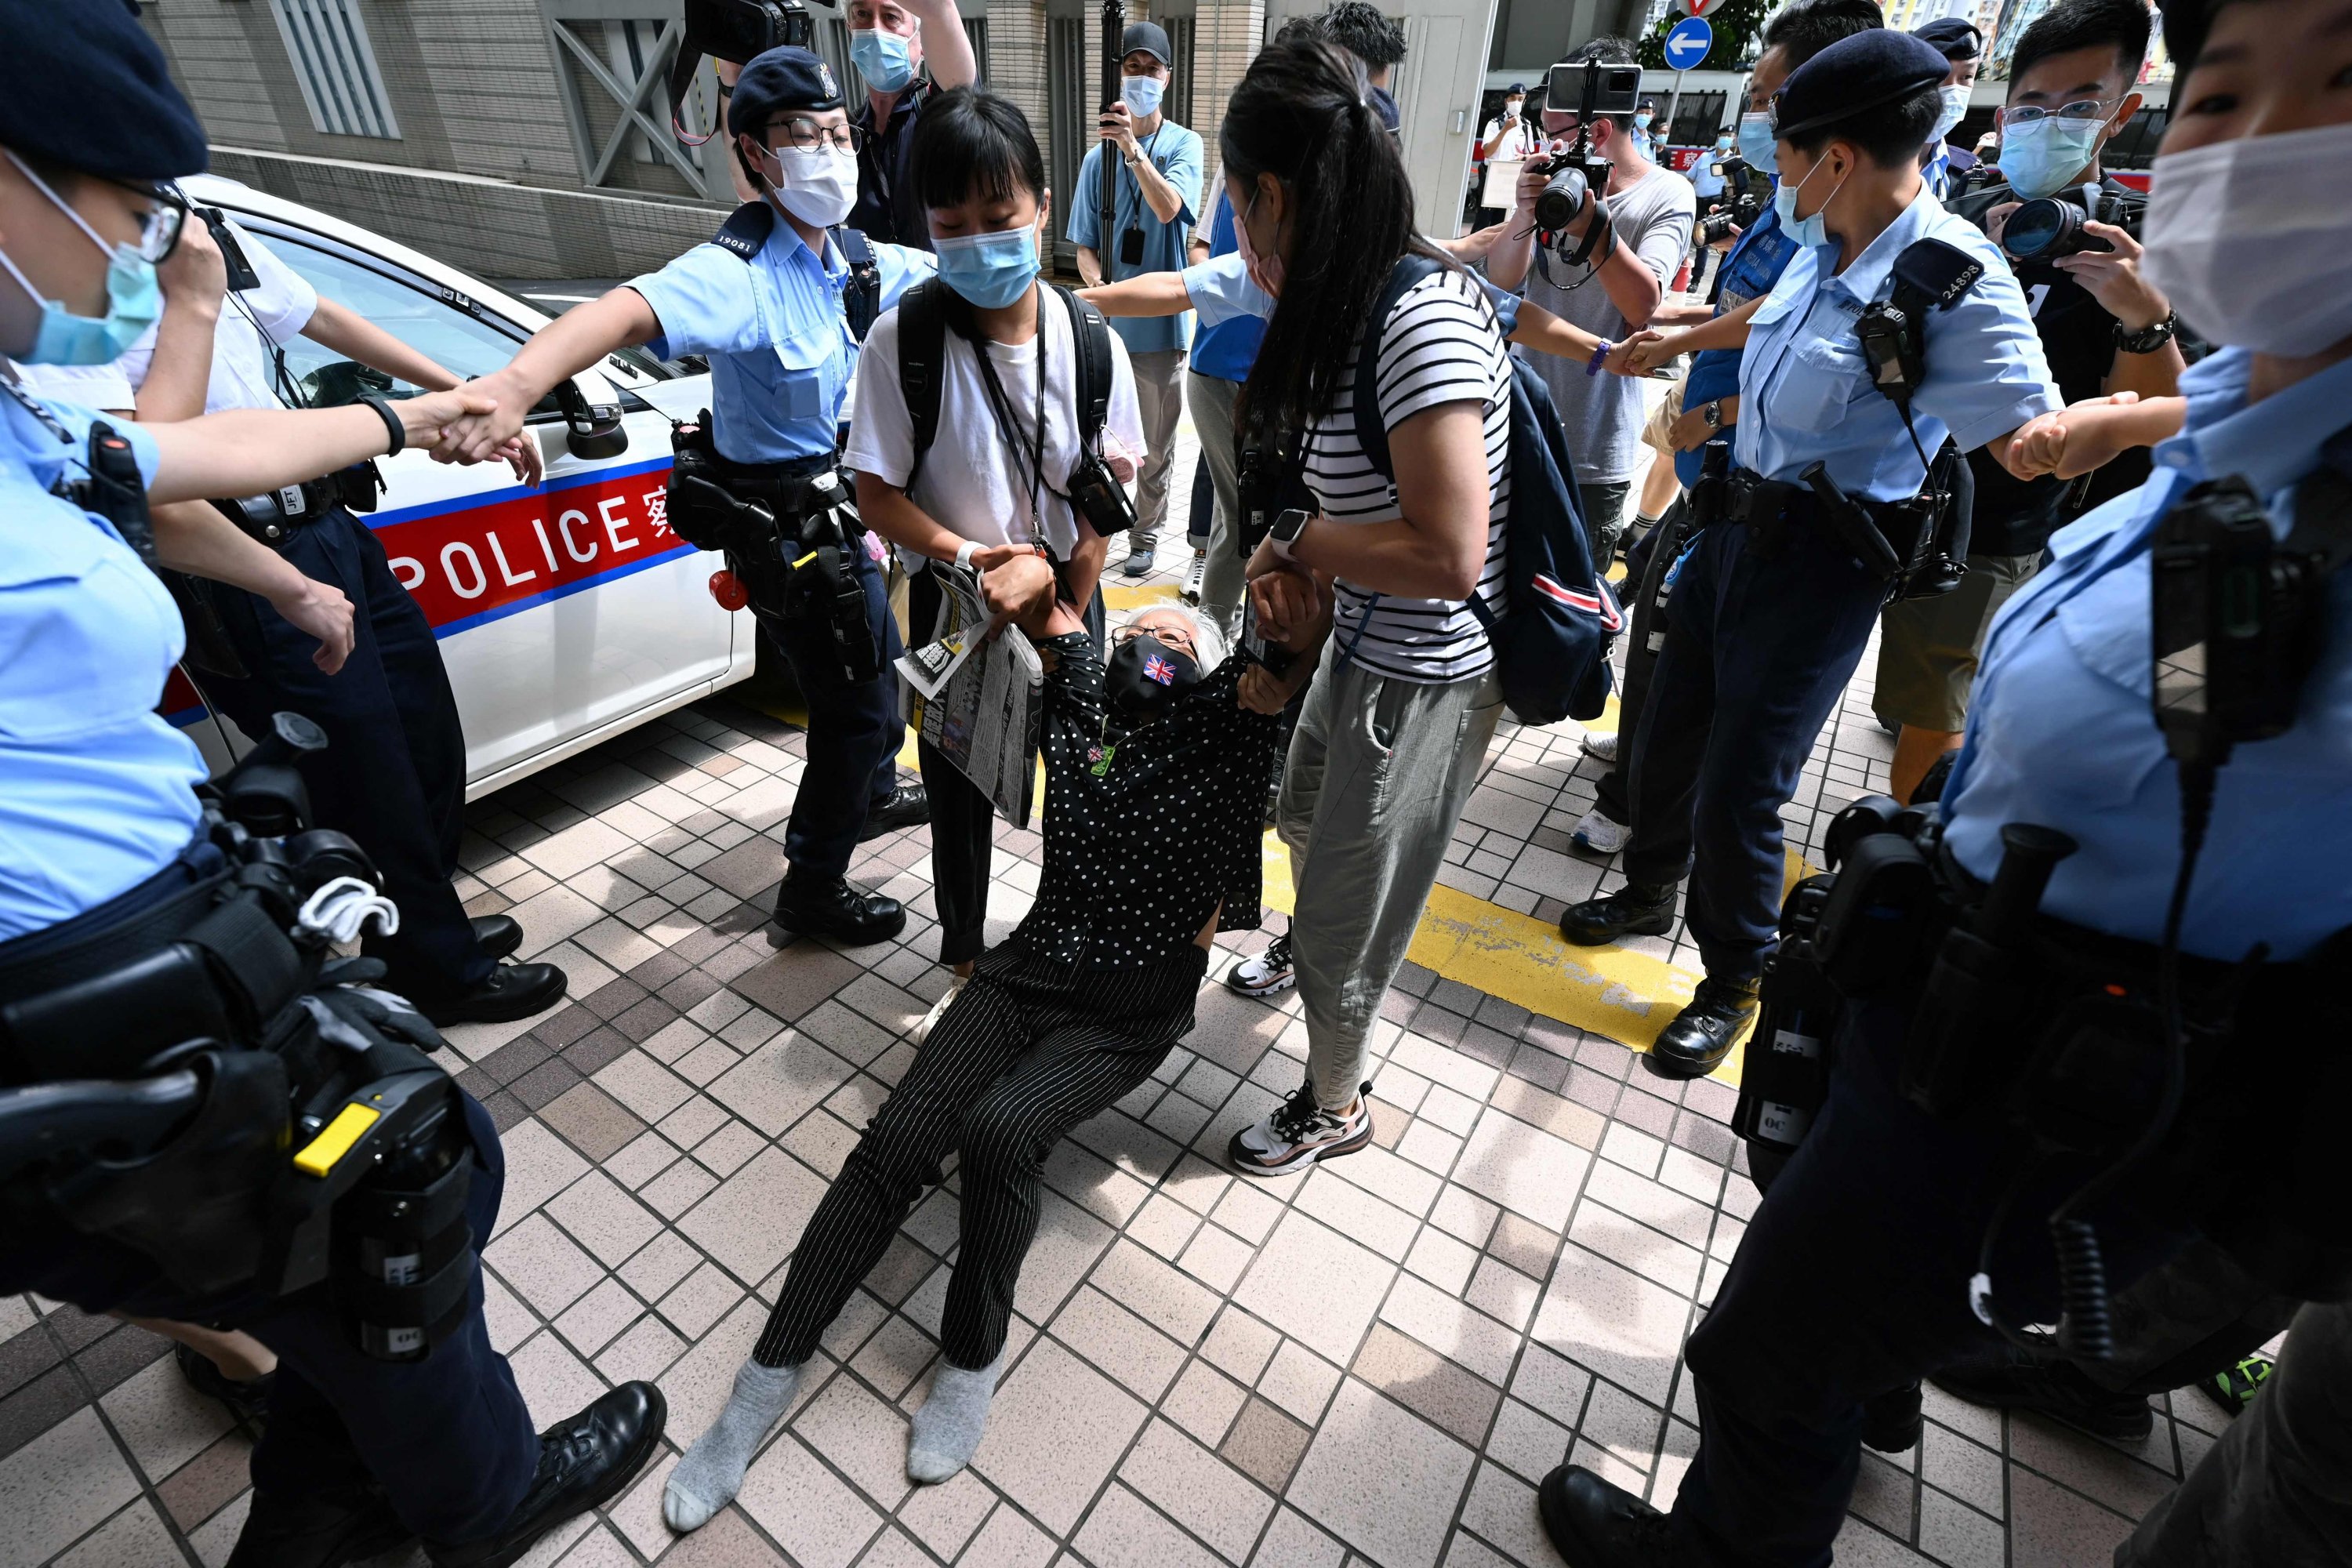 Activist Alexandra Wong (C), also known as Grandma Wong, is dragged away by police inside the court grounds in Hong Kong, China, June 19, 2021. (AFP Photo)